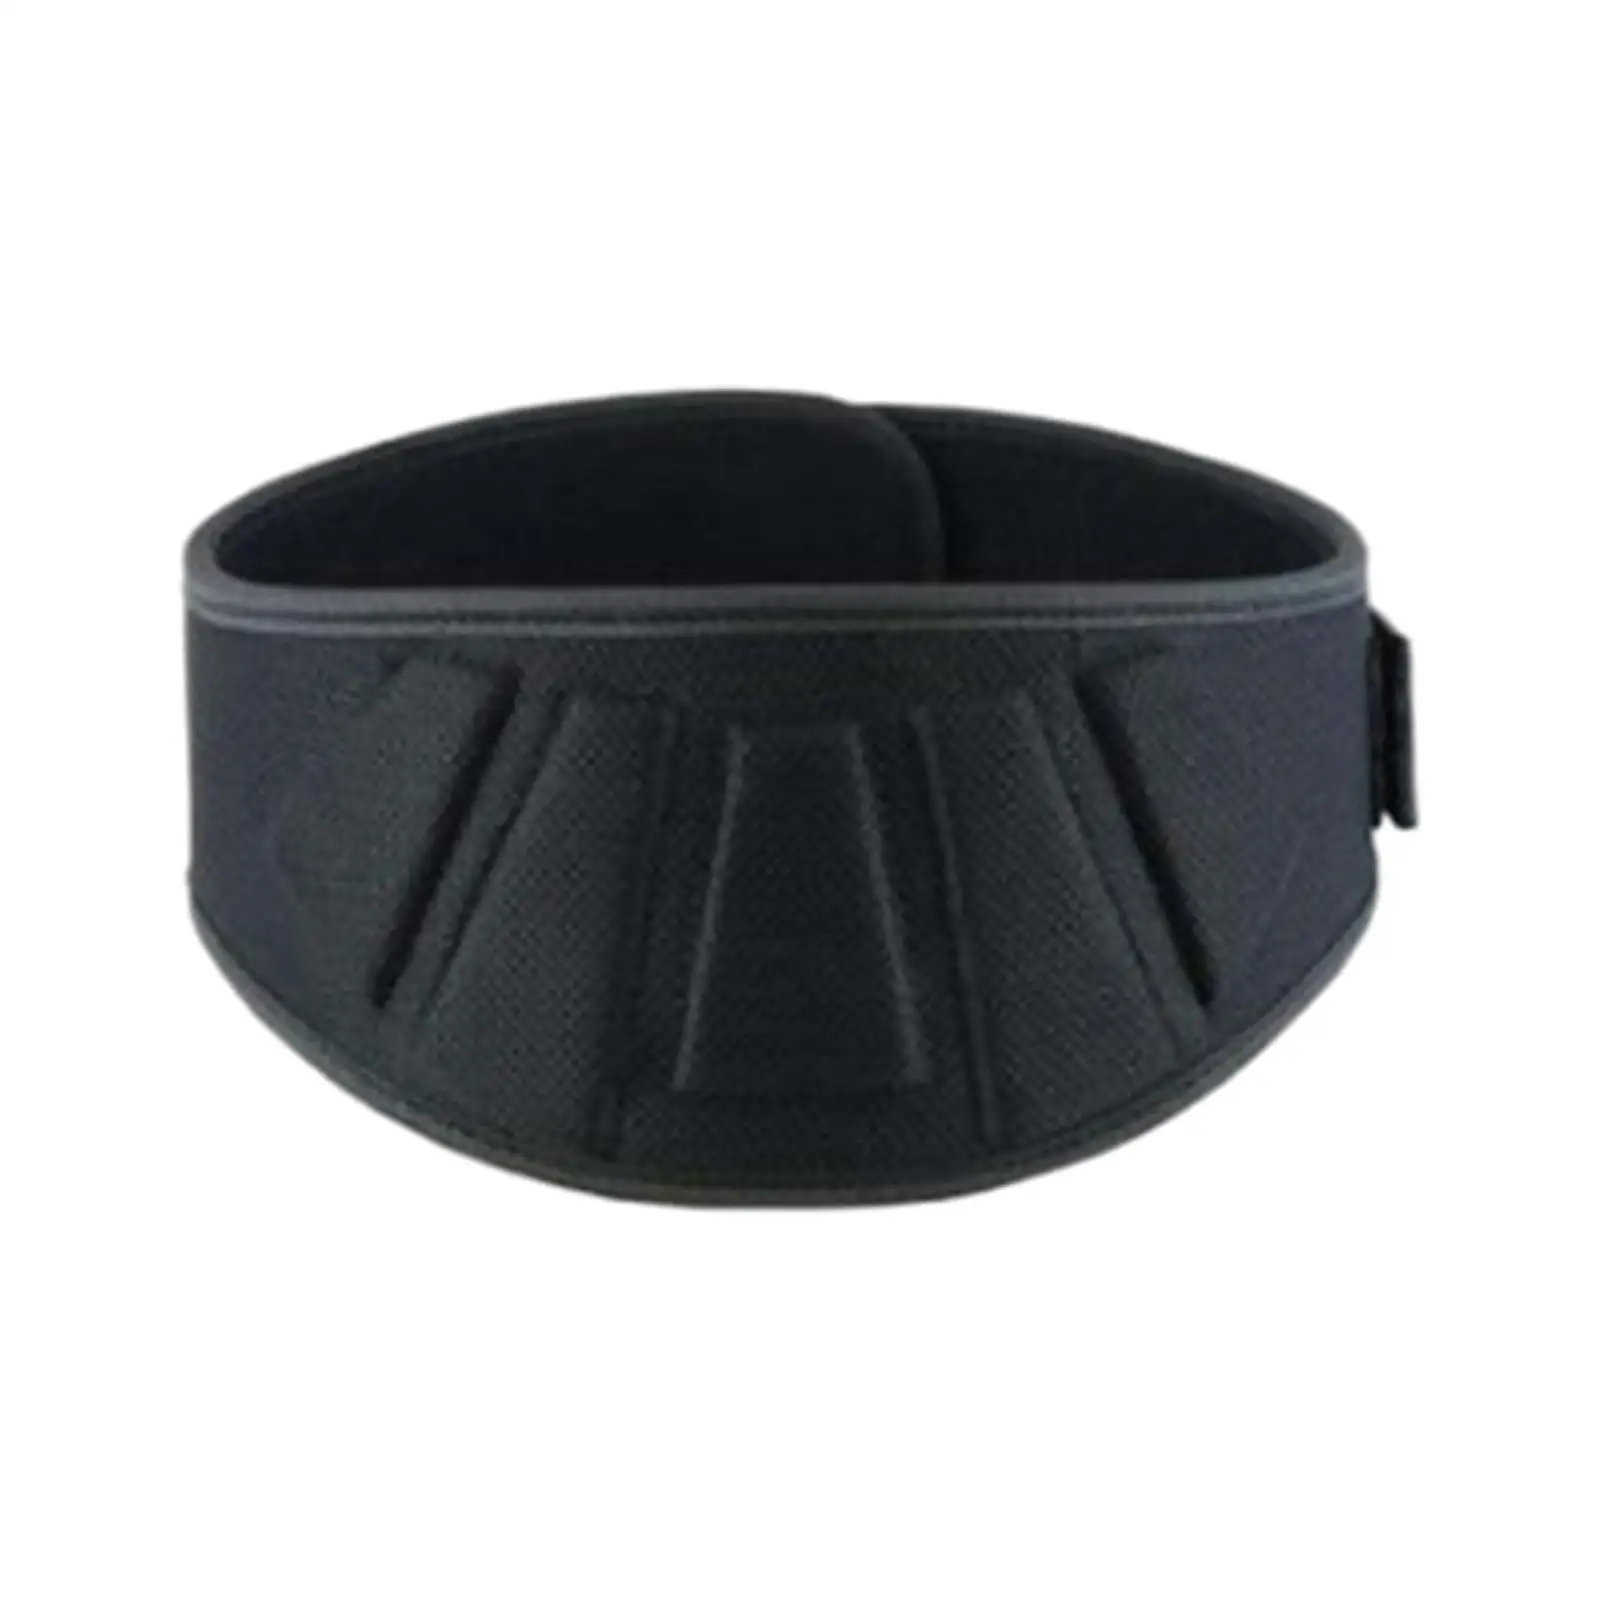 Breathable weightlifting belt, back support weightlifting exercise, training